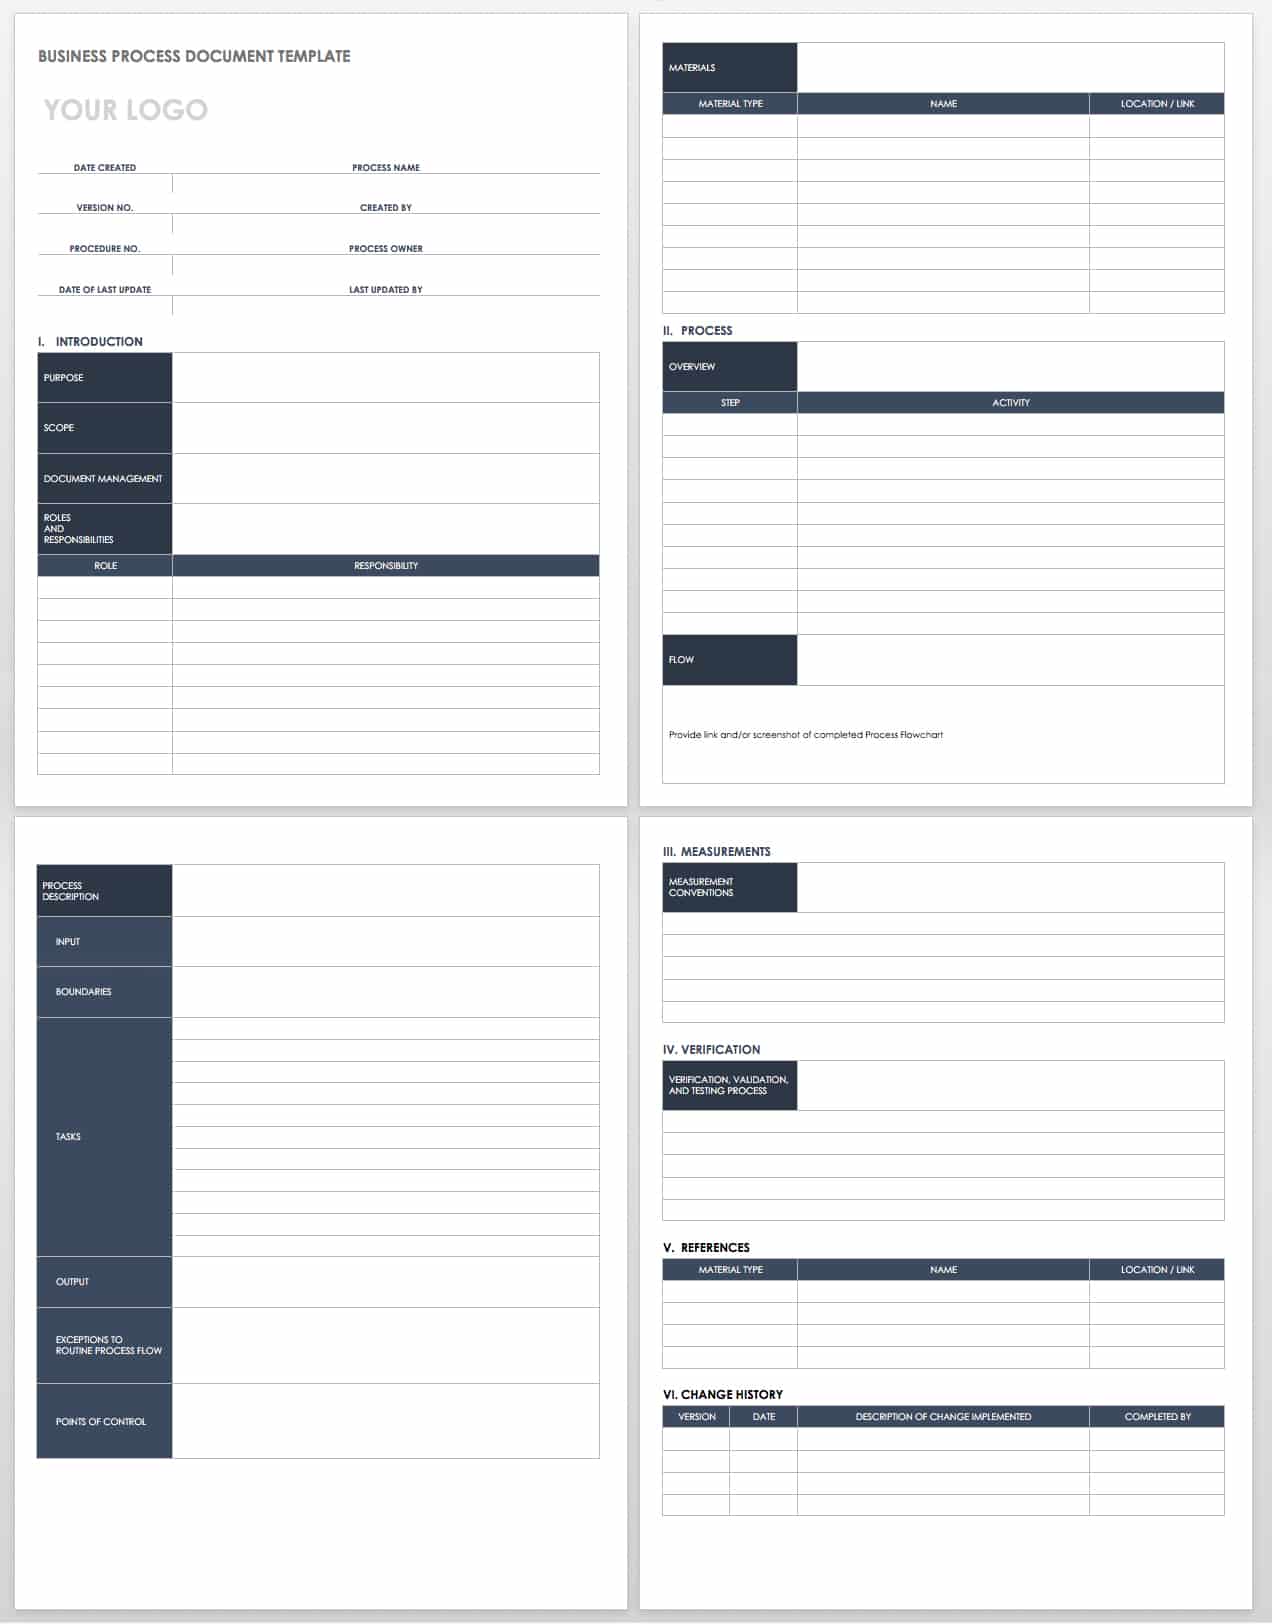 Business Process Document Template